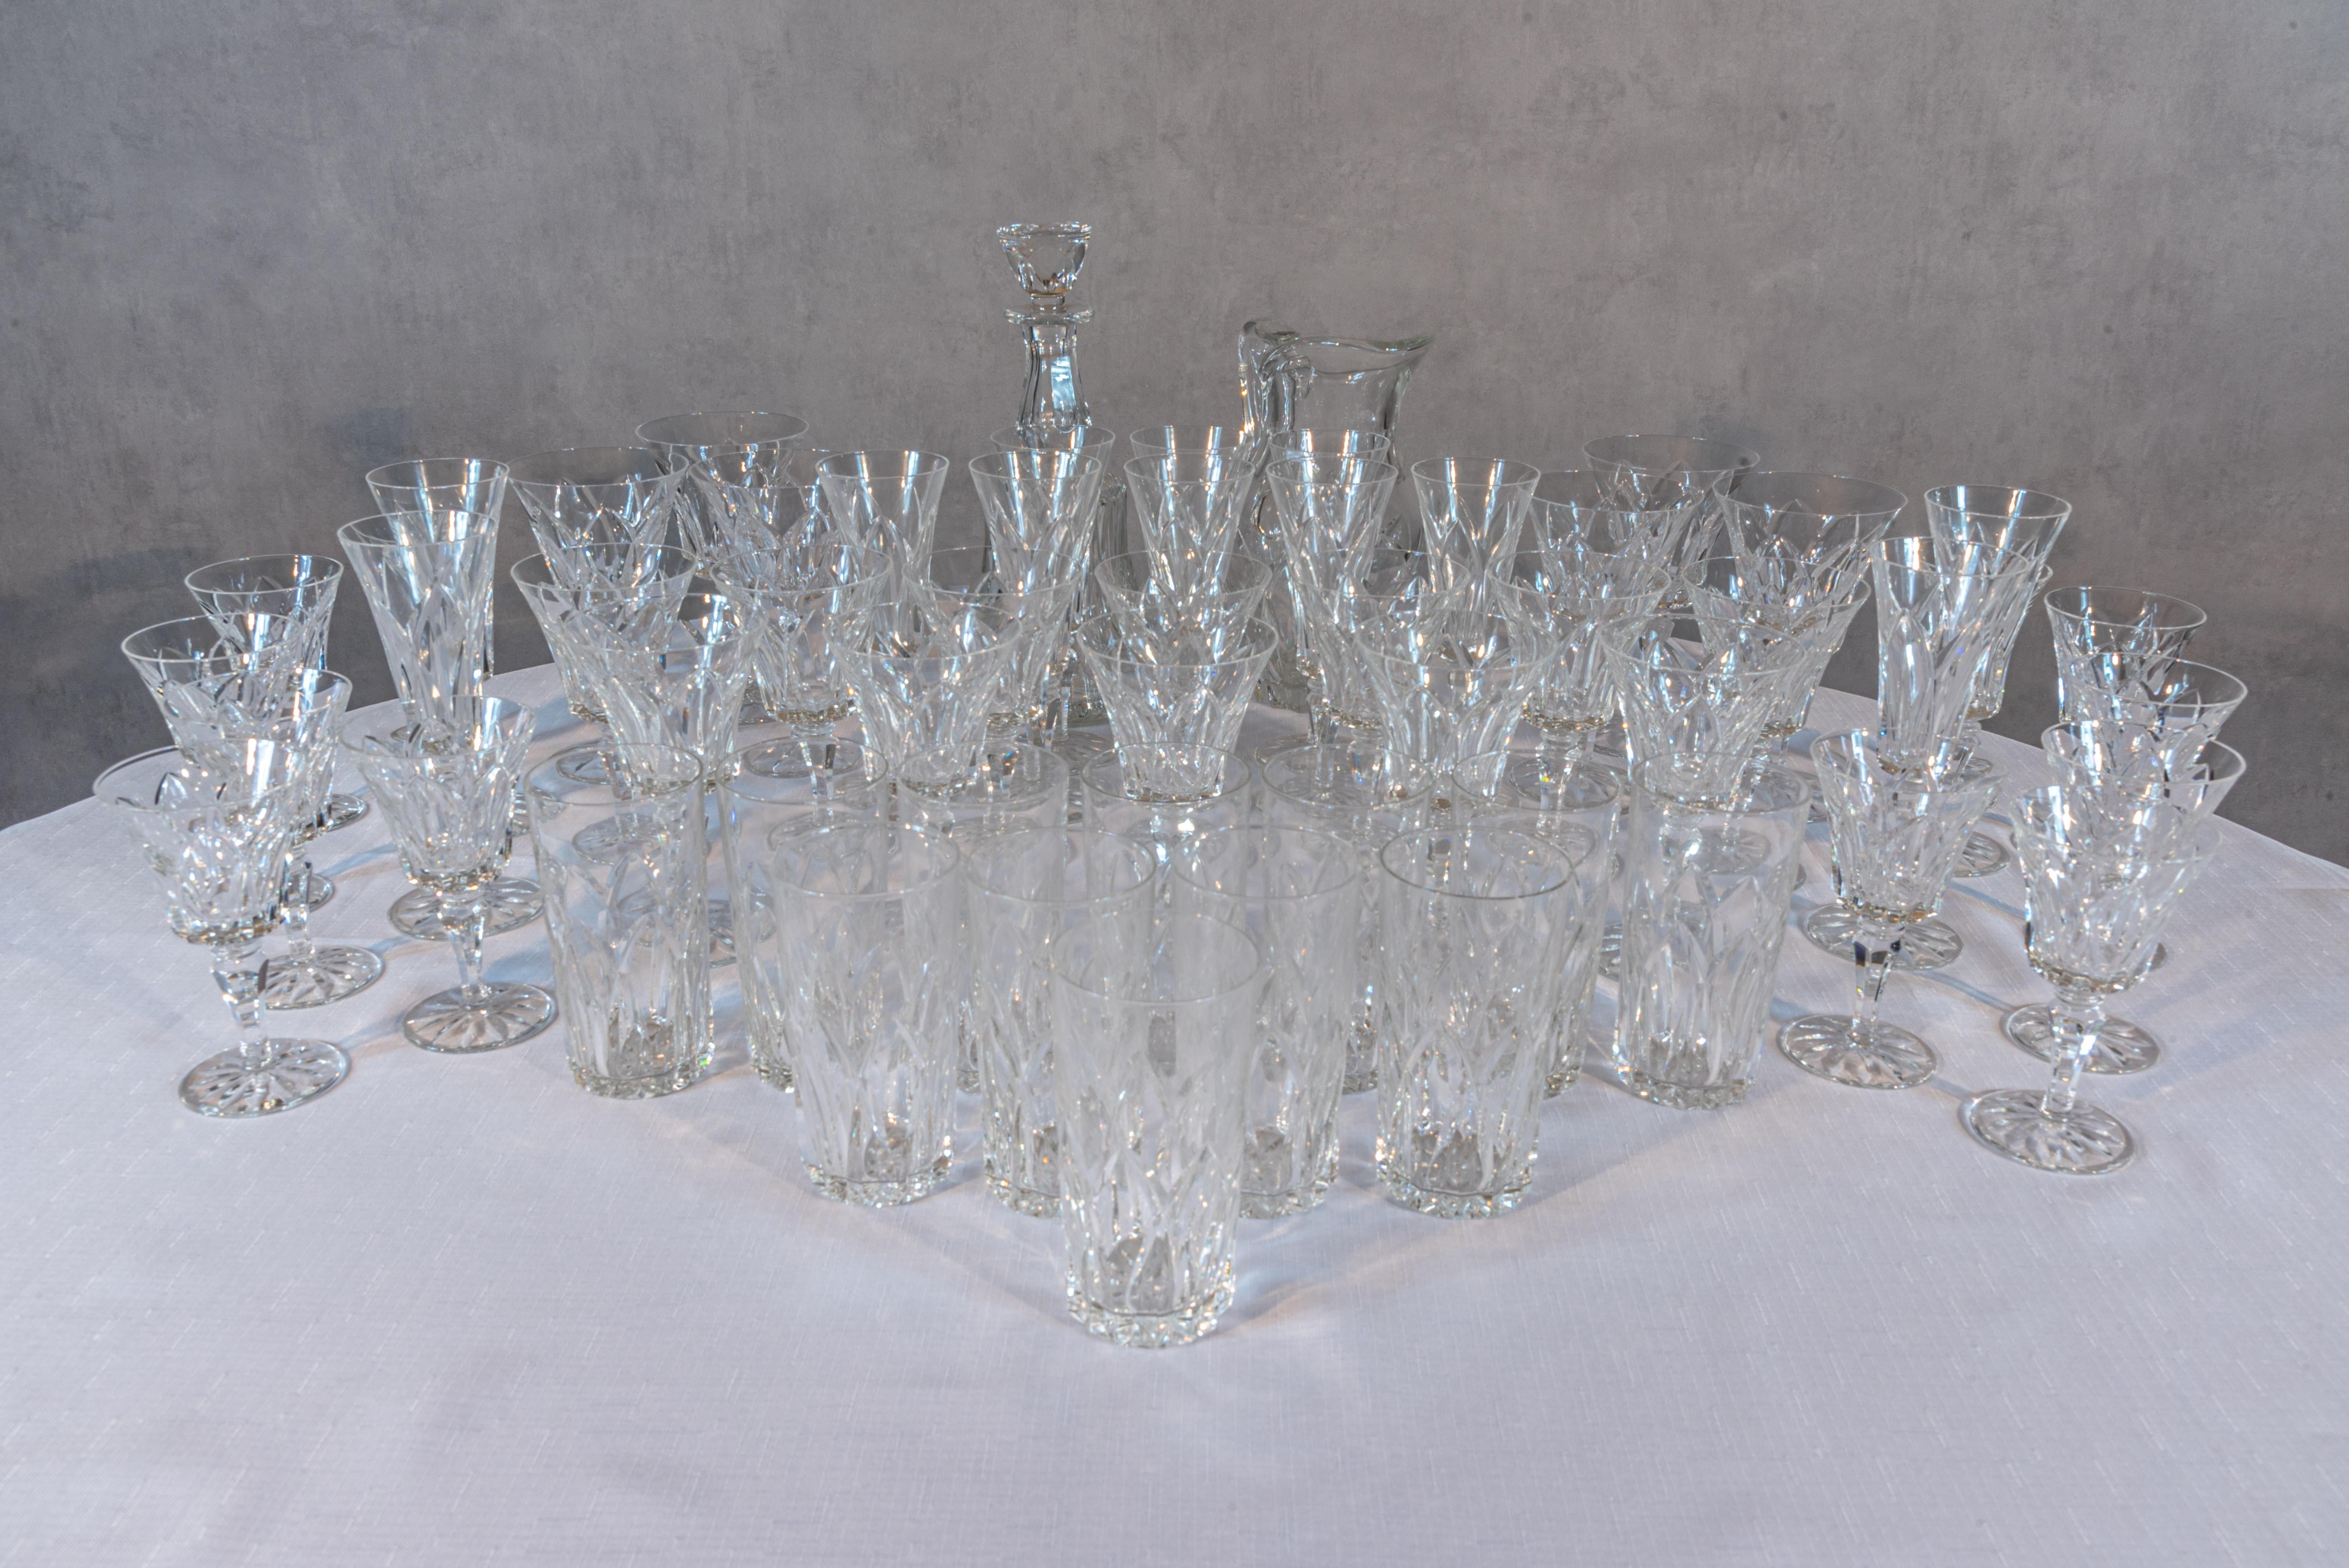 This Set of 55 Saint Louis Crystal is a luxurious ensemble that epitomizes refinement and elegance. Each piece is a testament to the exceptional craftsmanship and artistry of Saint Louis Crystal. The set includes a decanter, water carafe, flat water